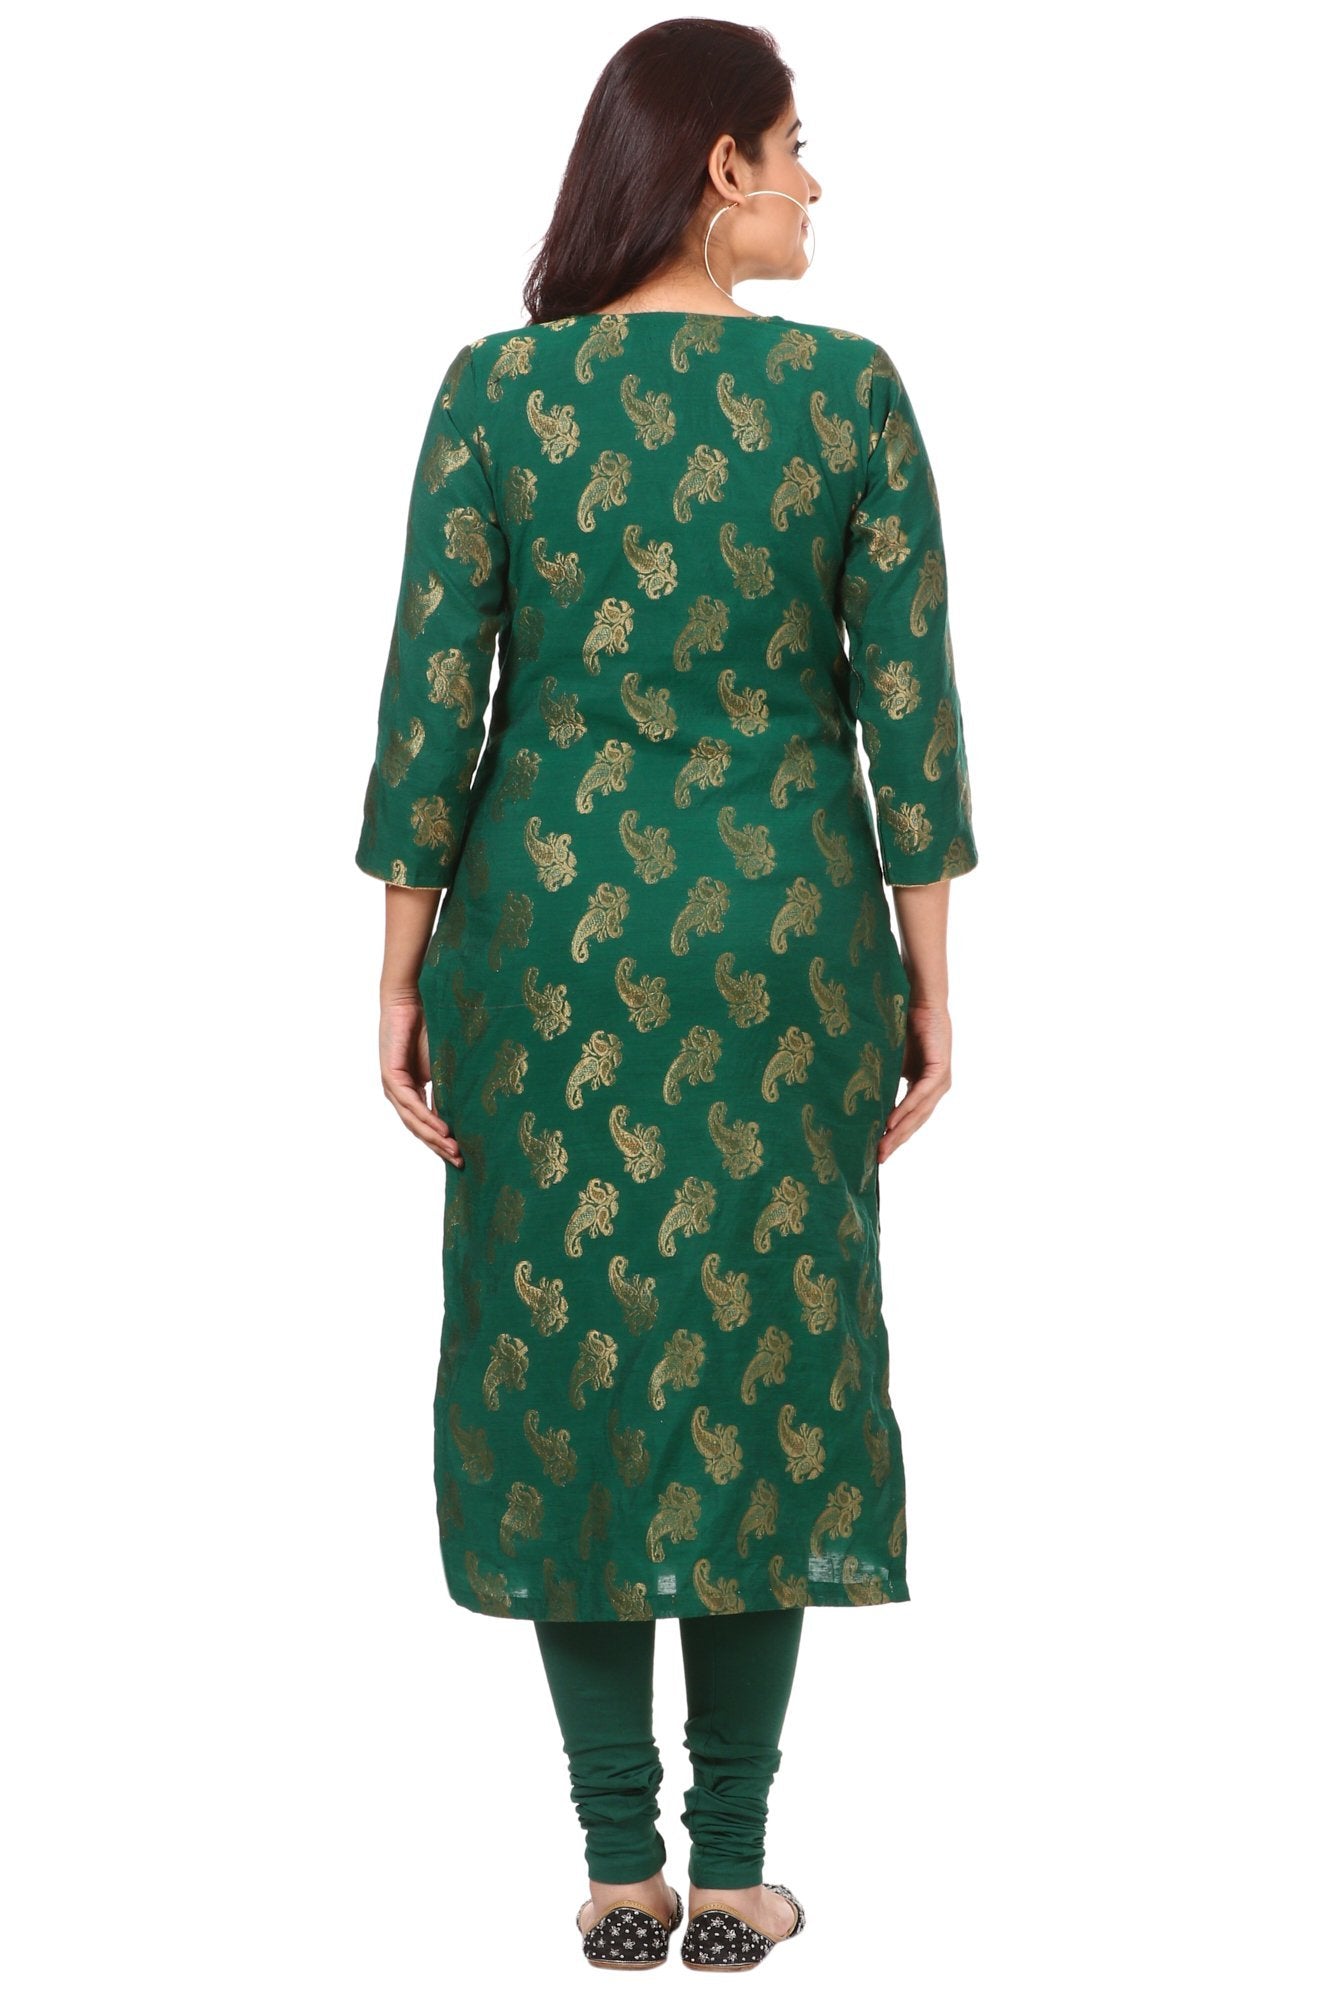 Color Blocked Rayon Kurti in Dark Green and Turquoise : TVE740